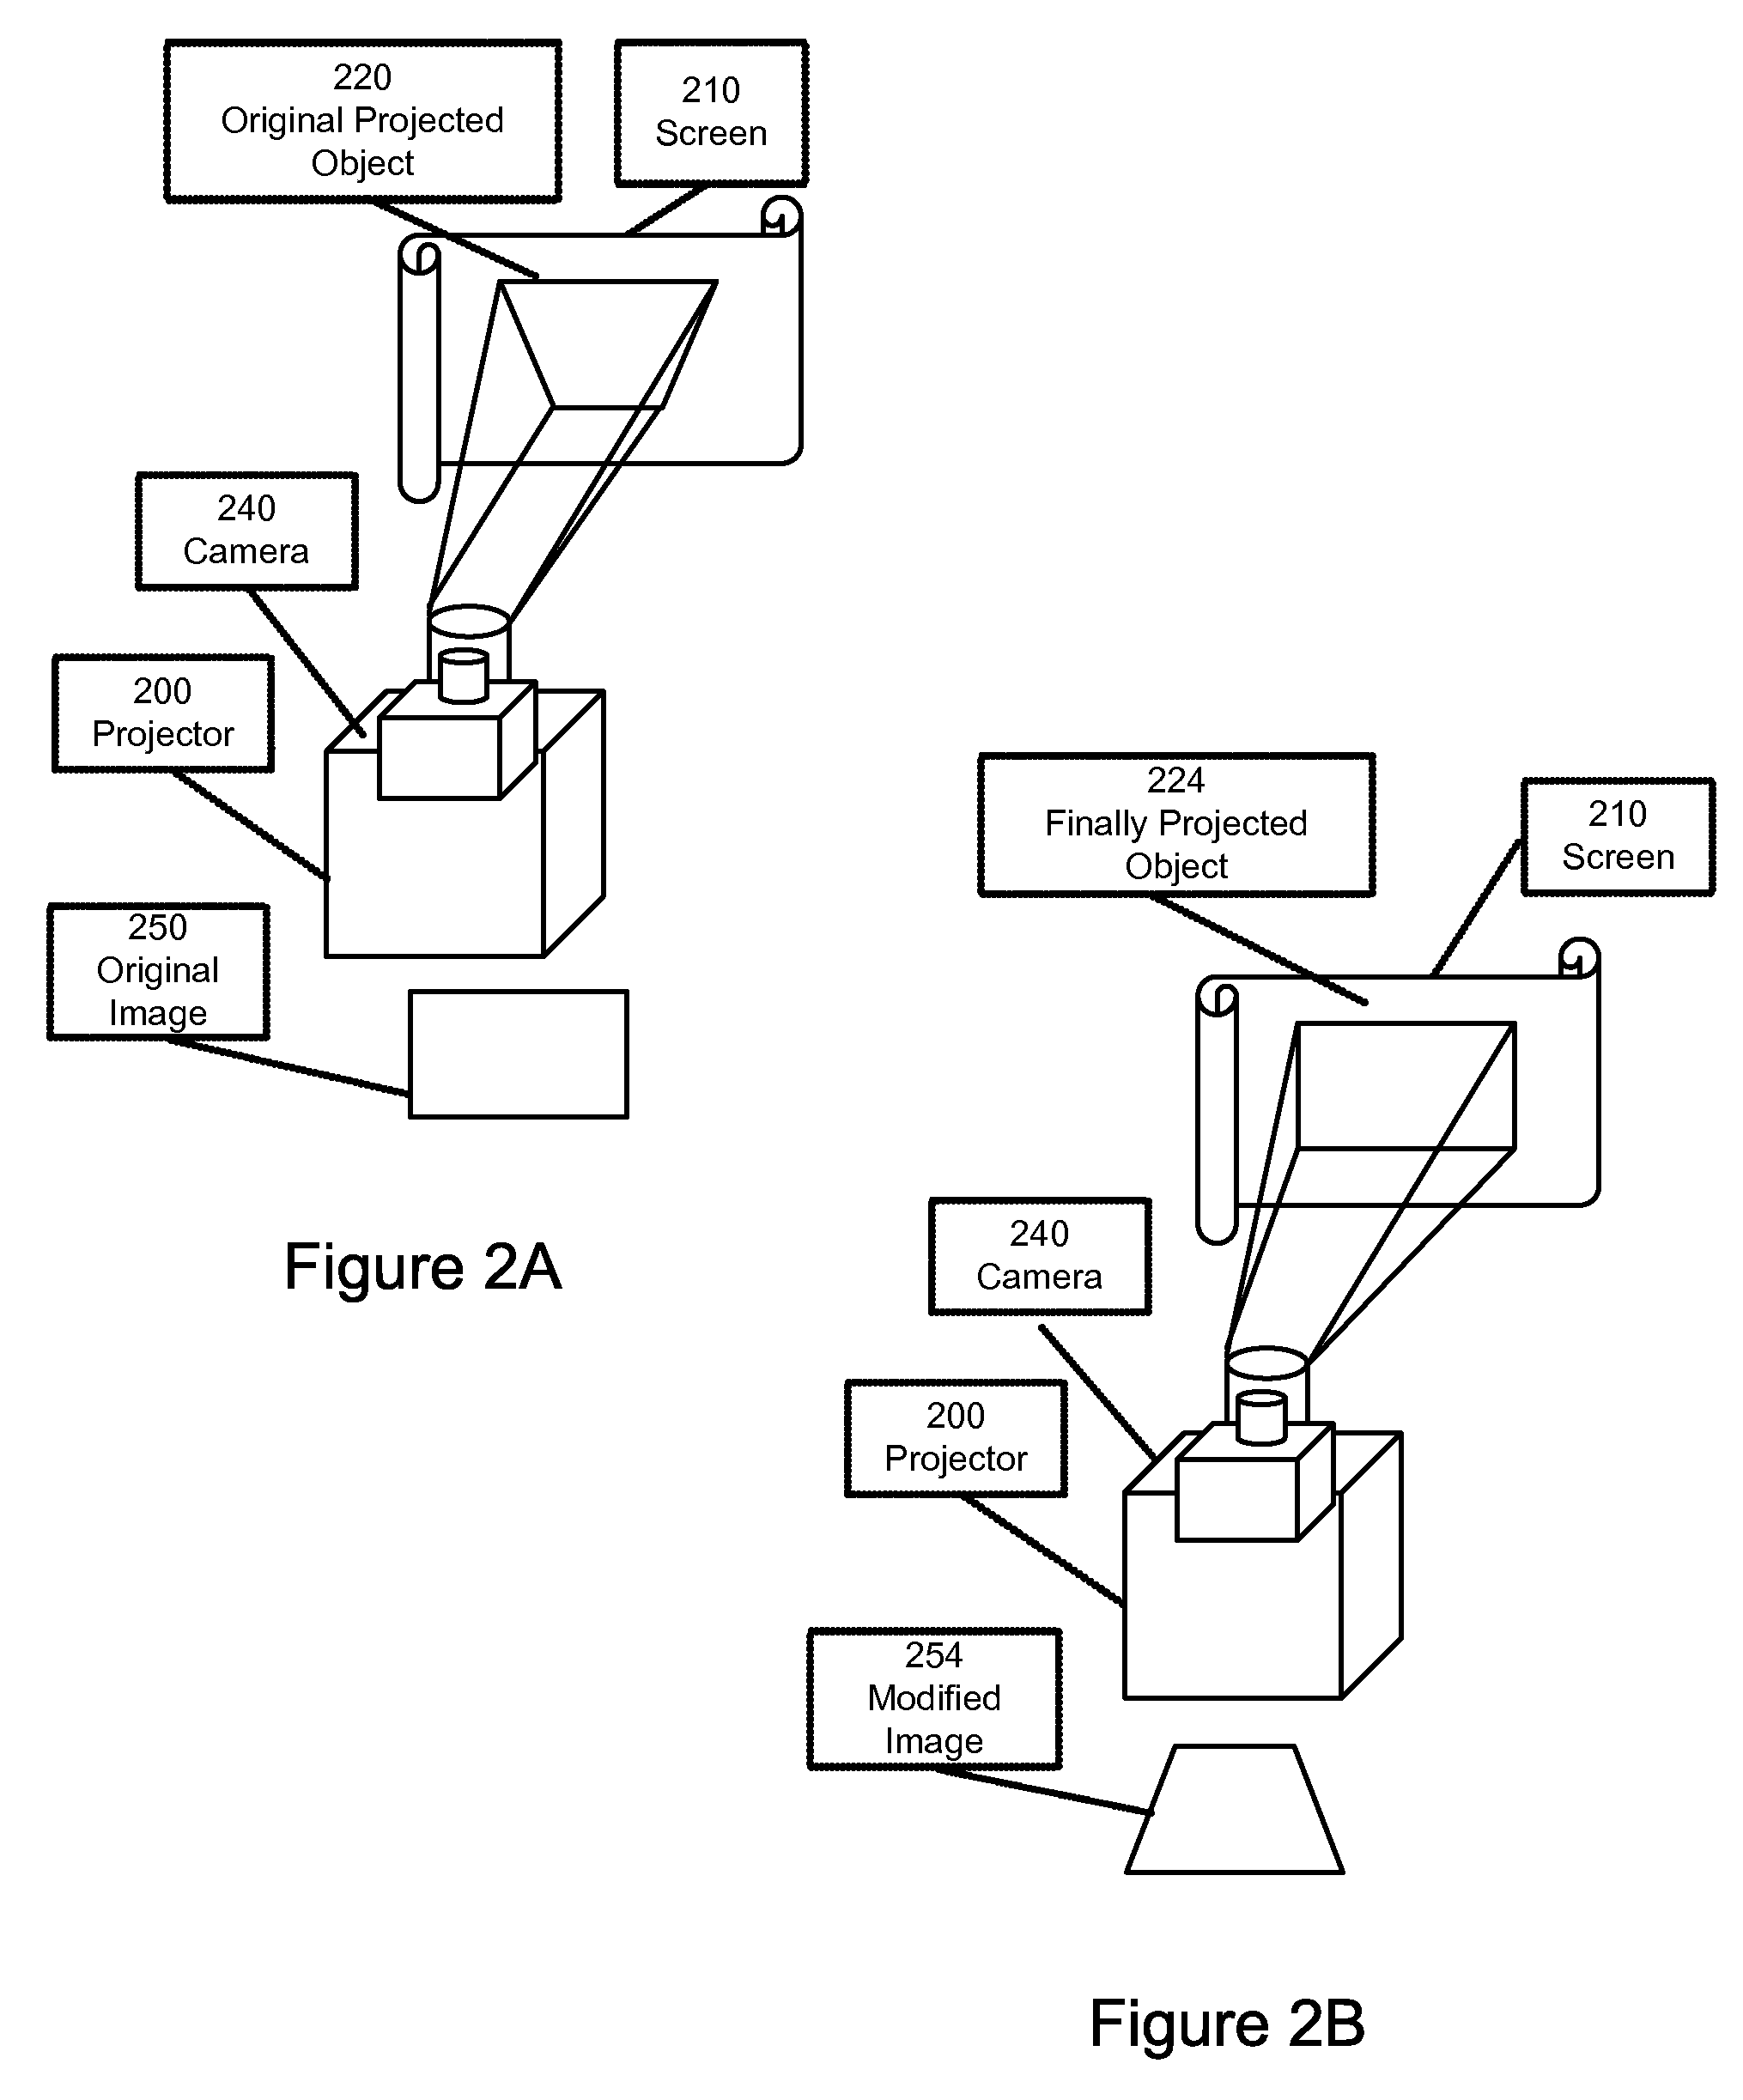 Camera Based Feedback Loop Calibration of a Projection Device